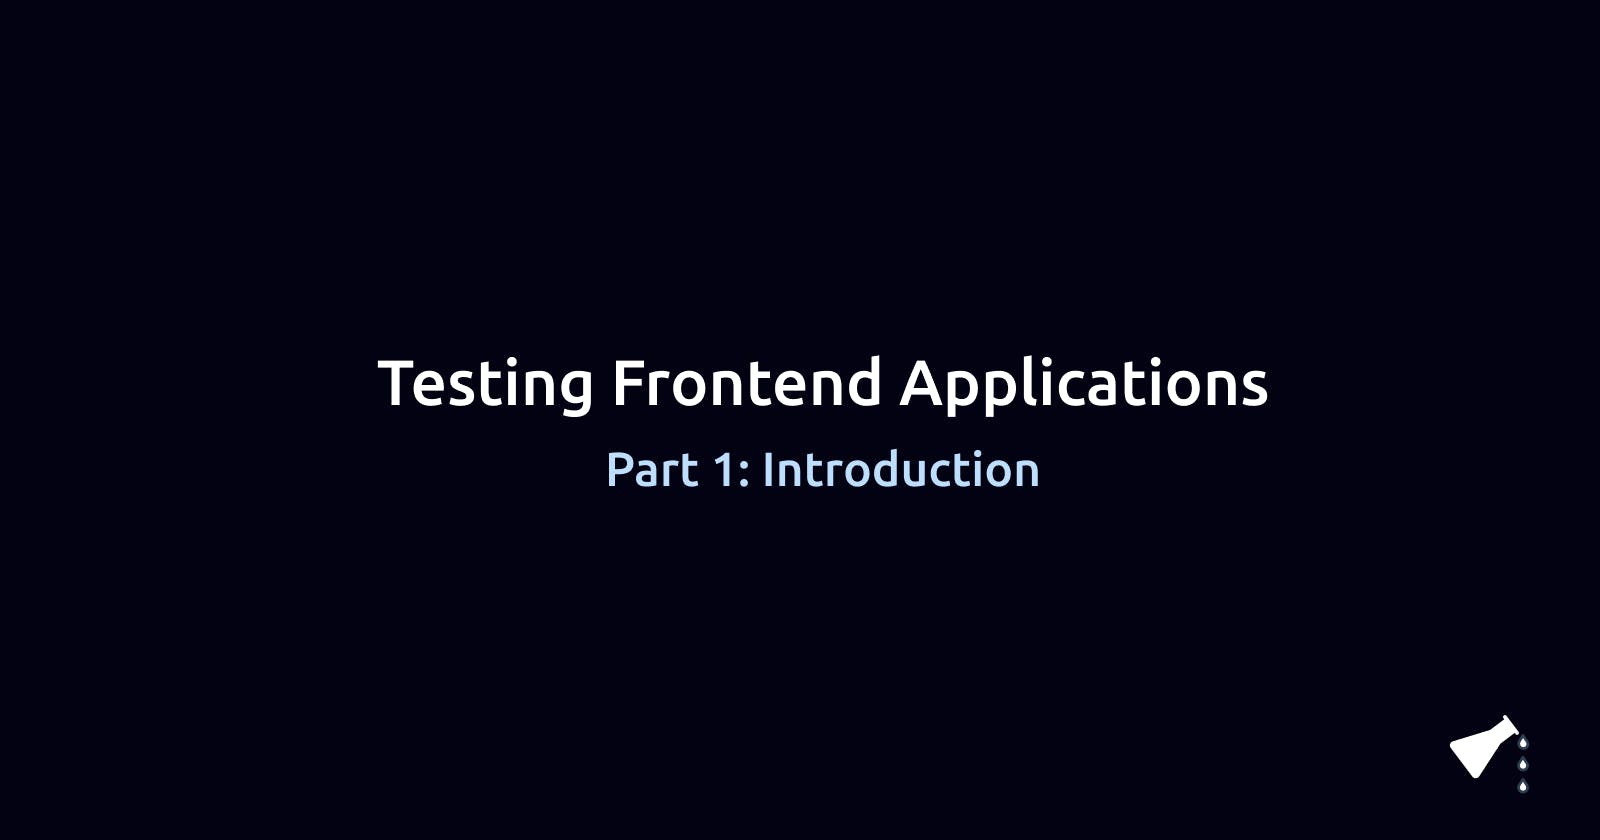 Testing Frontend Applications: Introduction (Part 1)